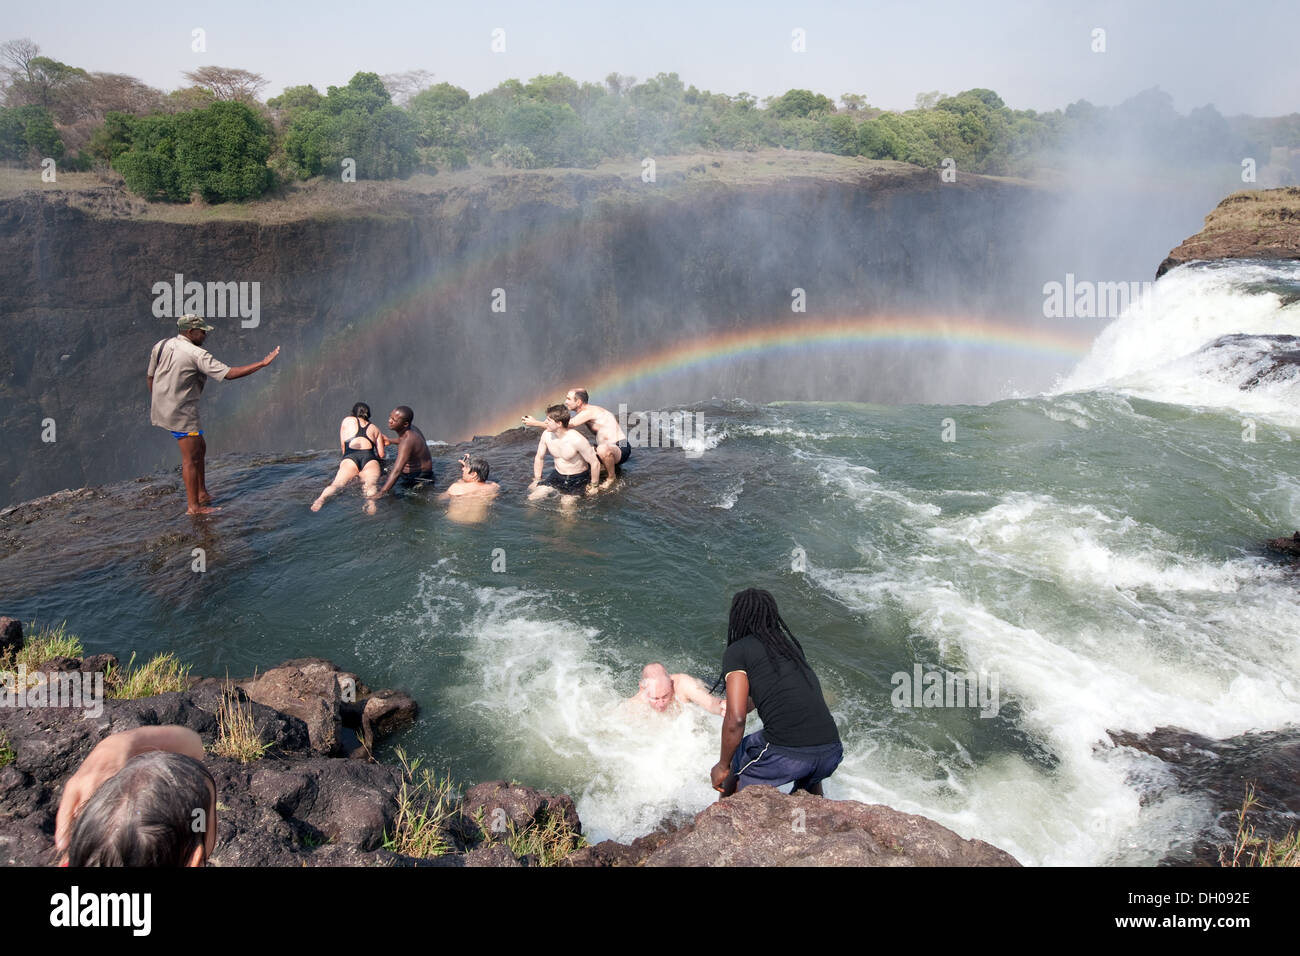 Devils Pool Victoria Falls;  Zambia side, people on an adventure holiday swimming on the edge of the Falls in Devil's Pool, Zambia Africa Stock Photo